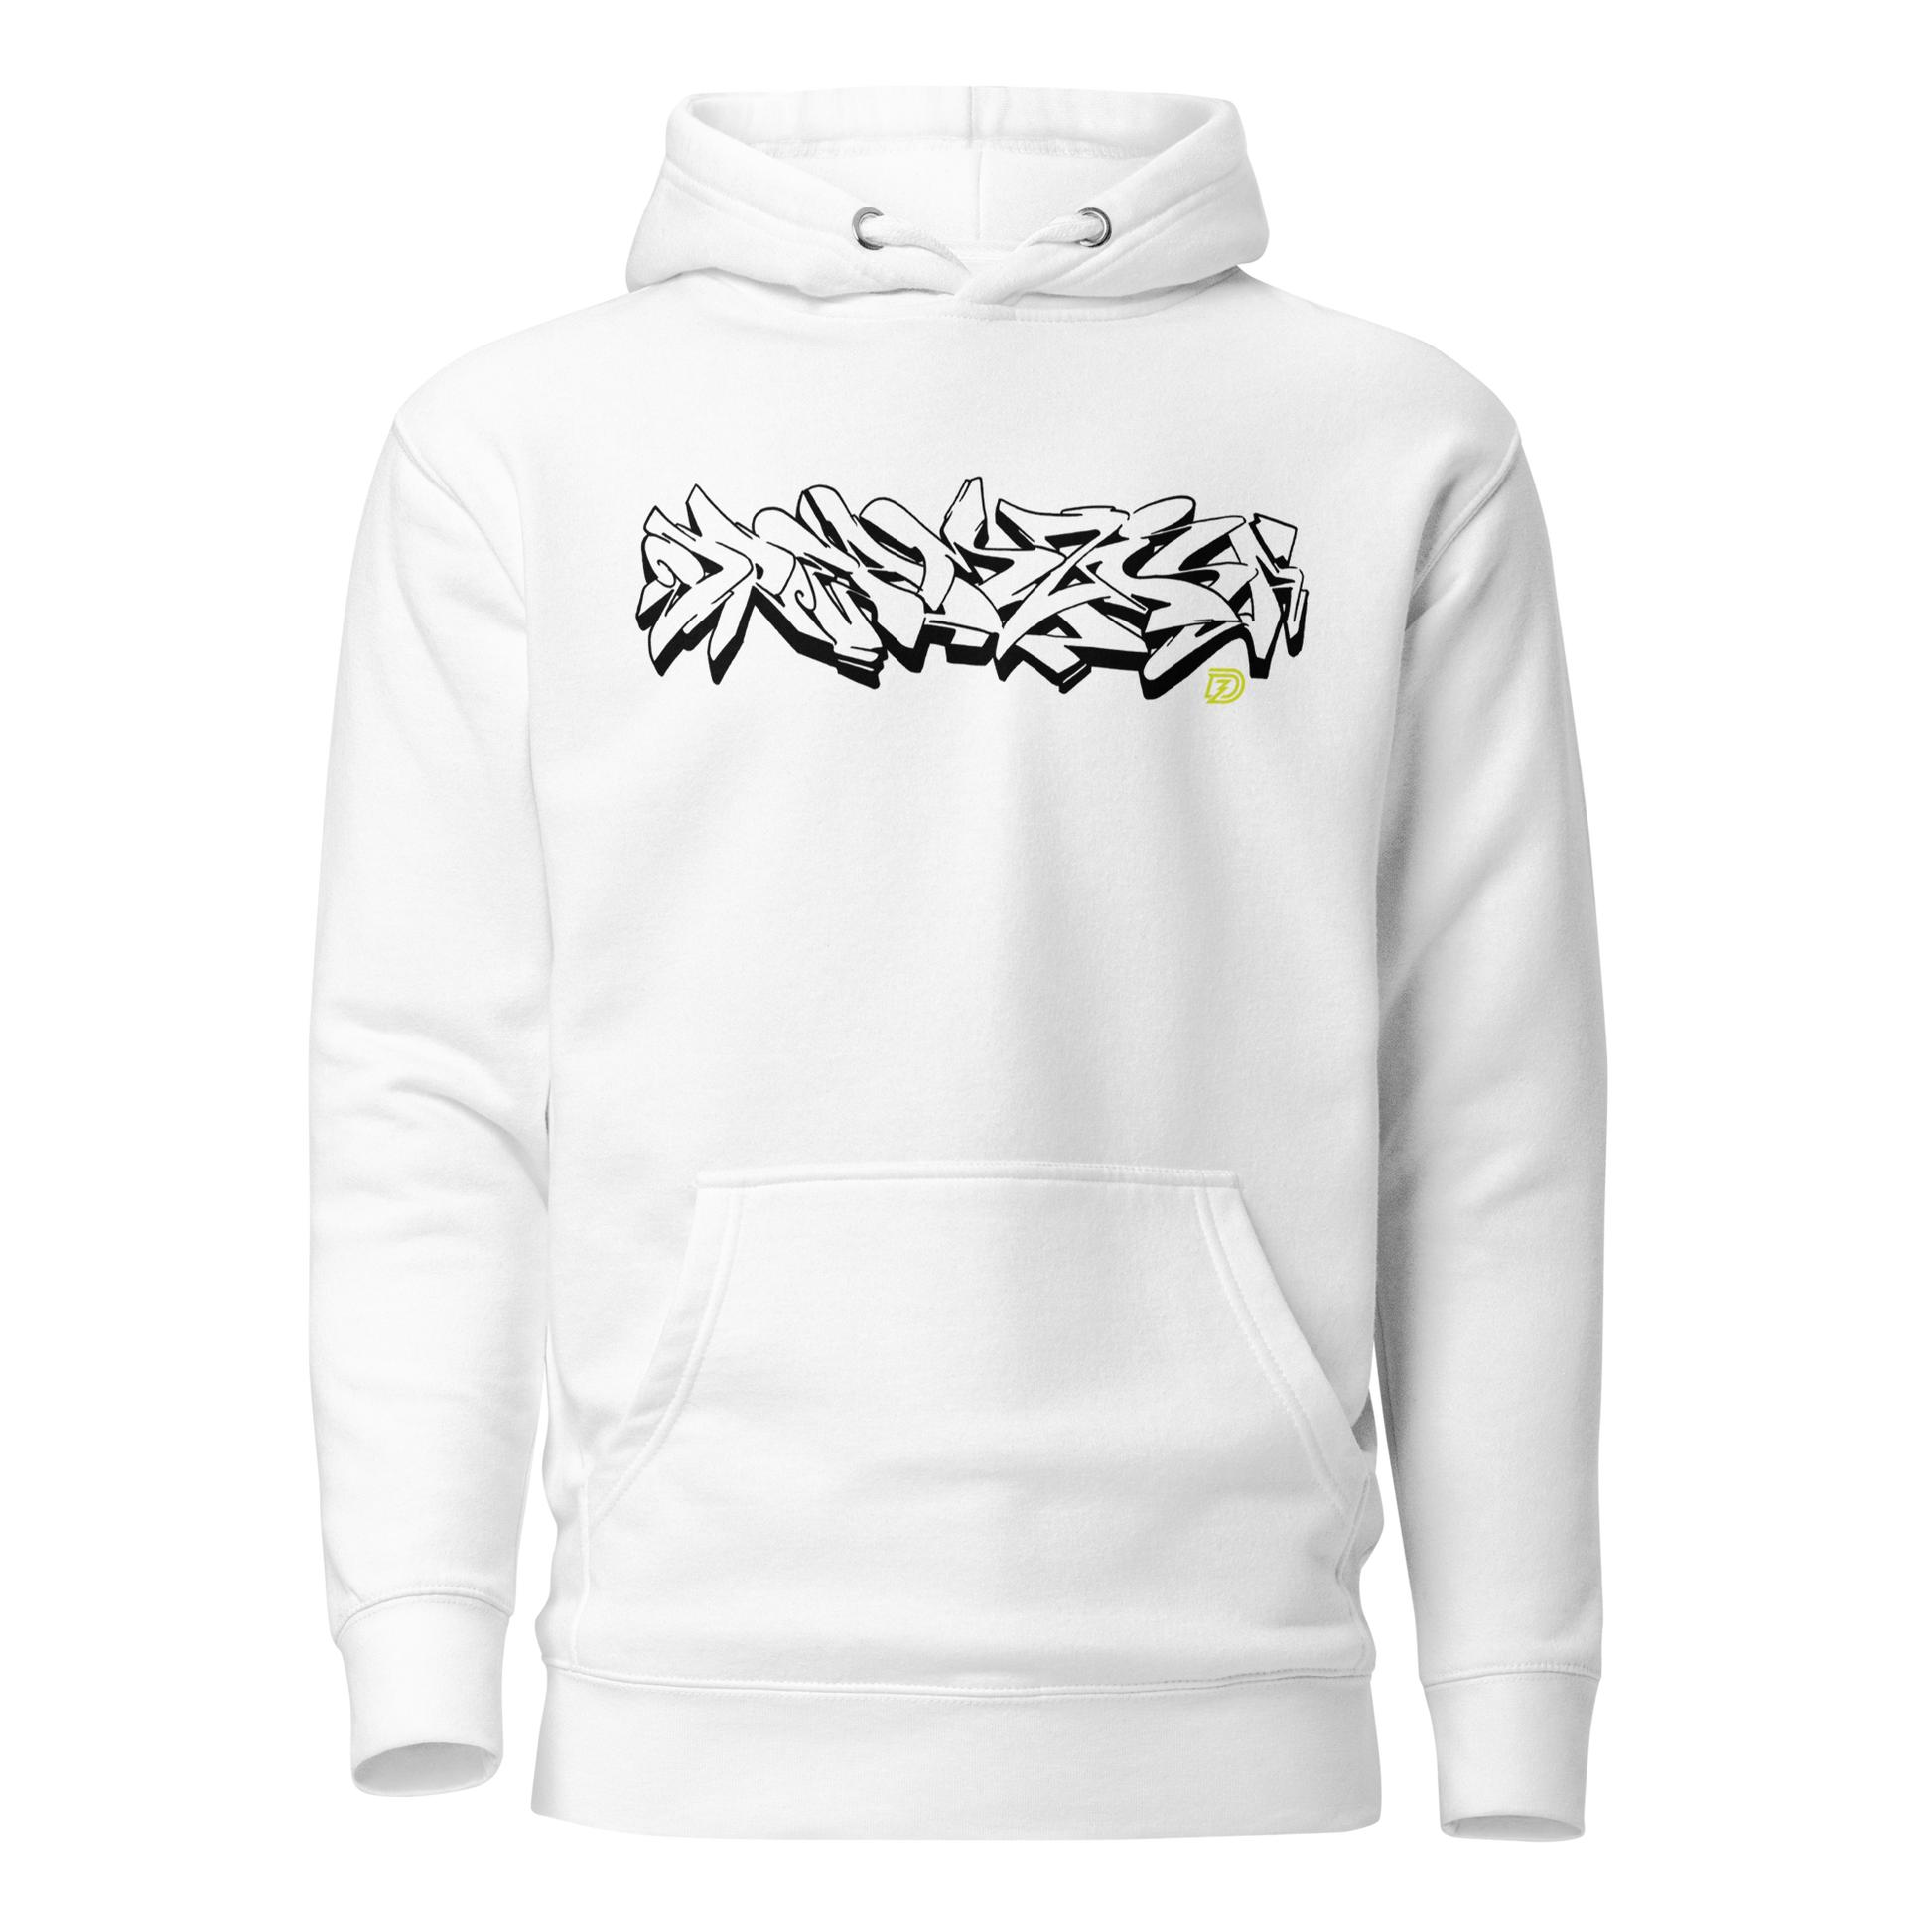 Graffiti Wildstyle 2 by Sanitor Unisex Hoodie in White